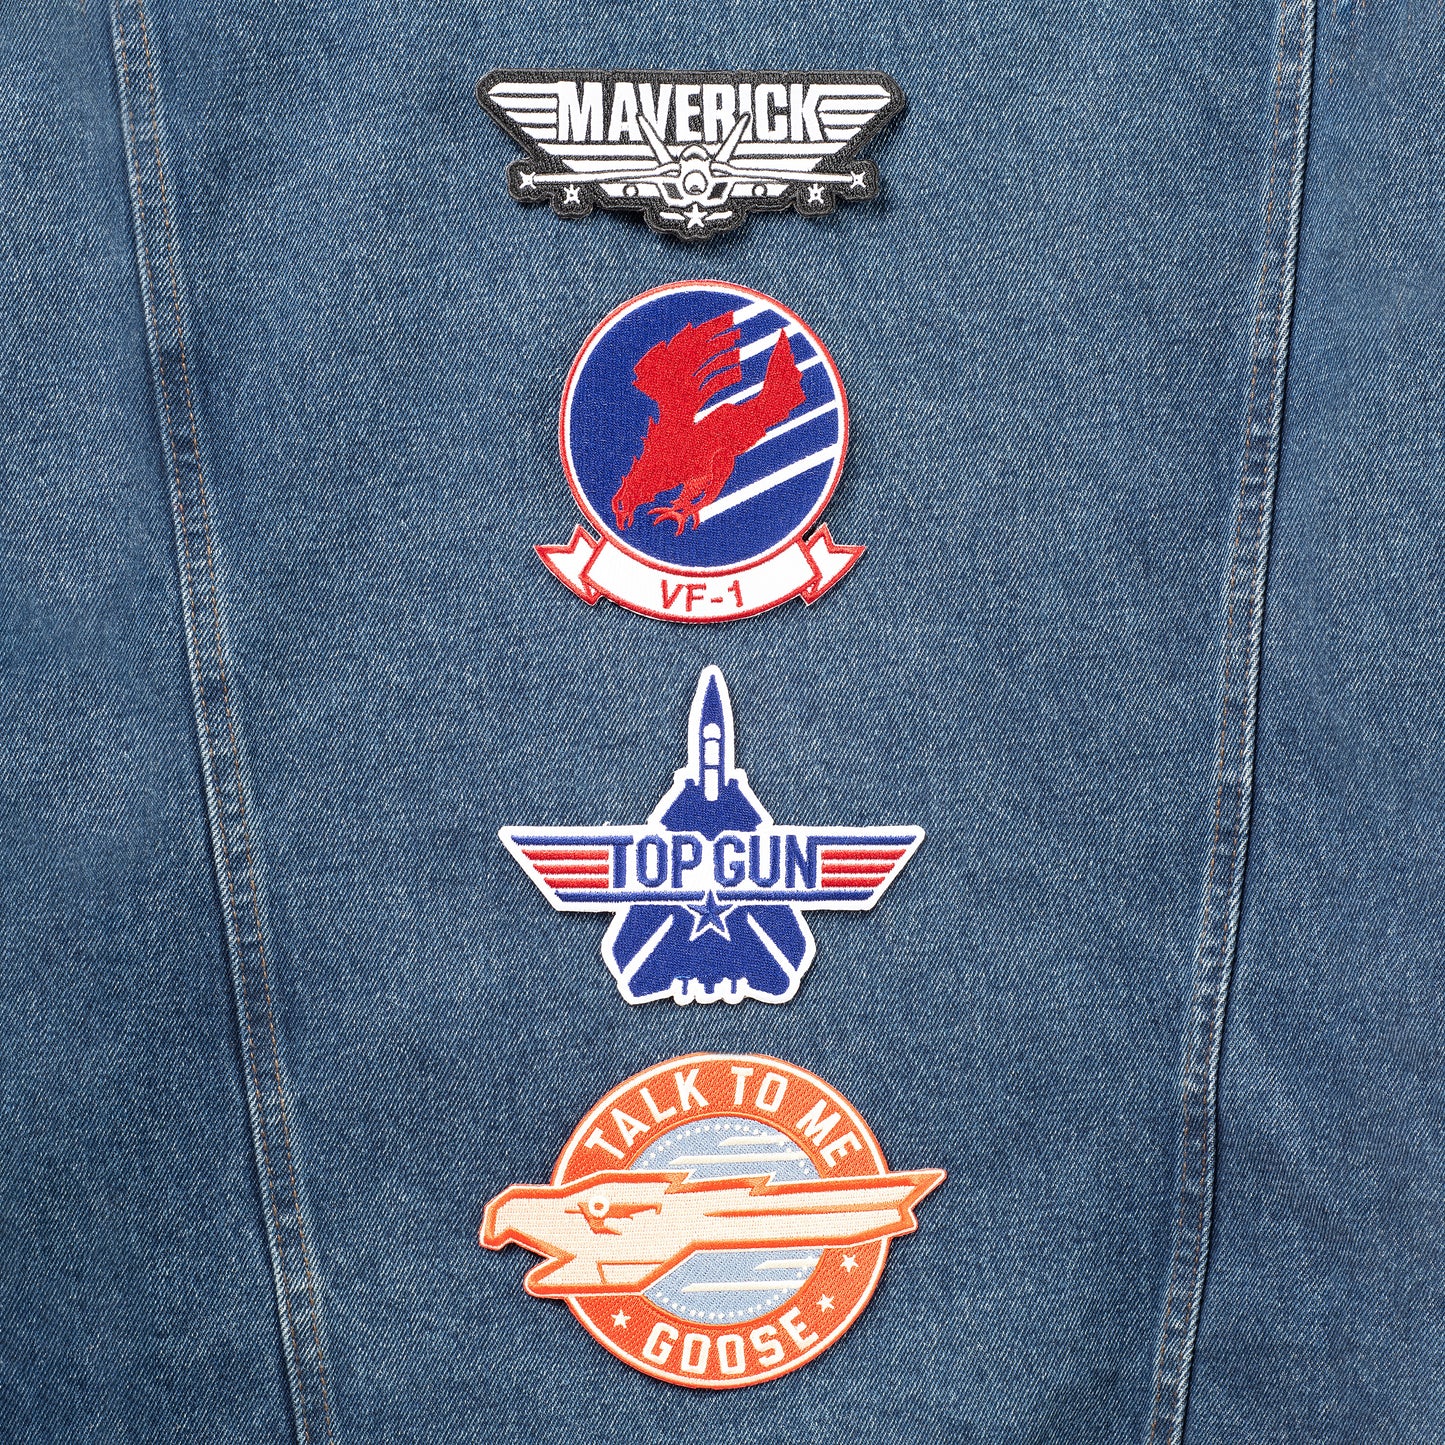 Top Gun VF-1 Embroidered Patch